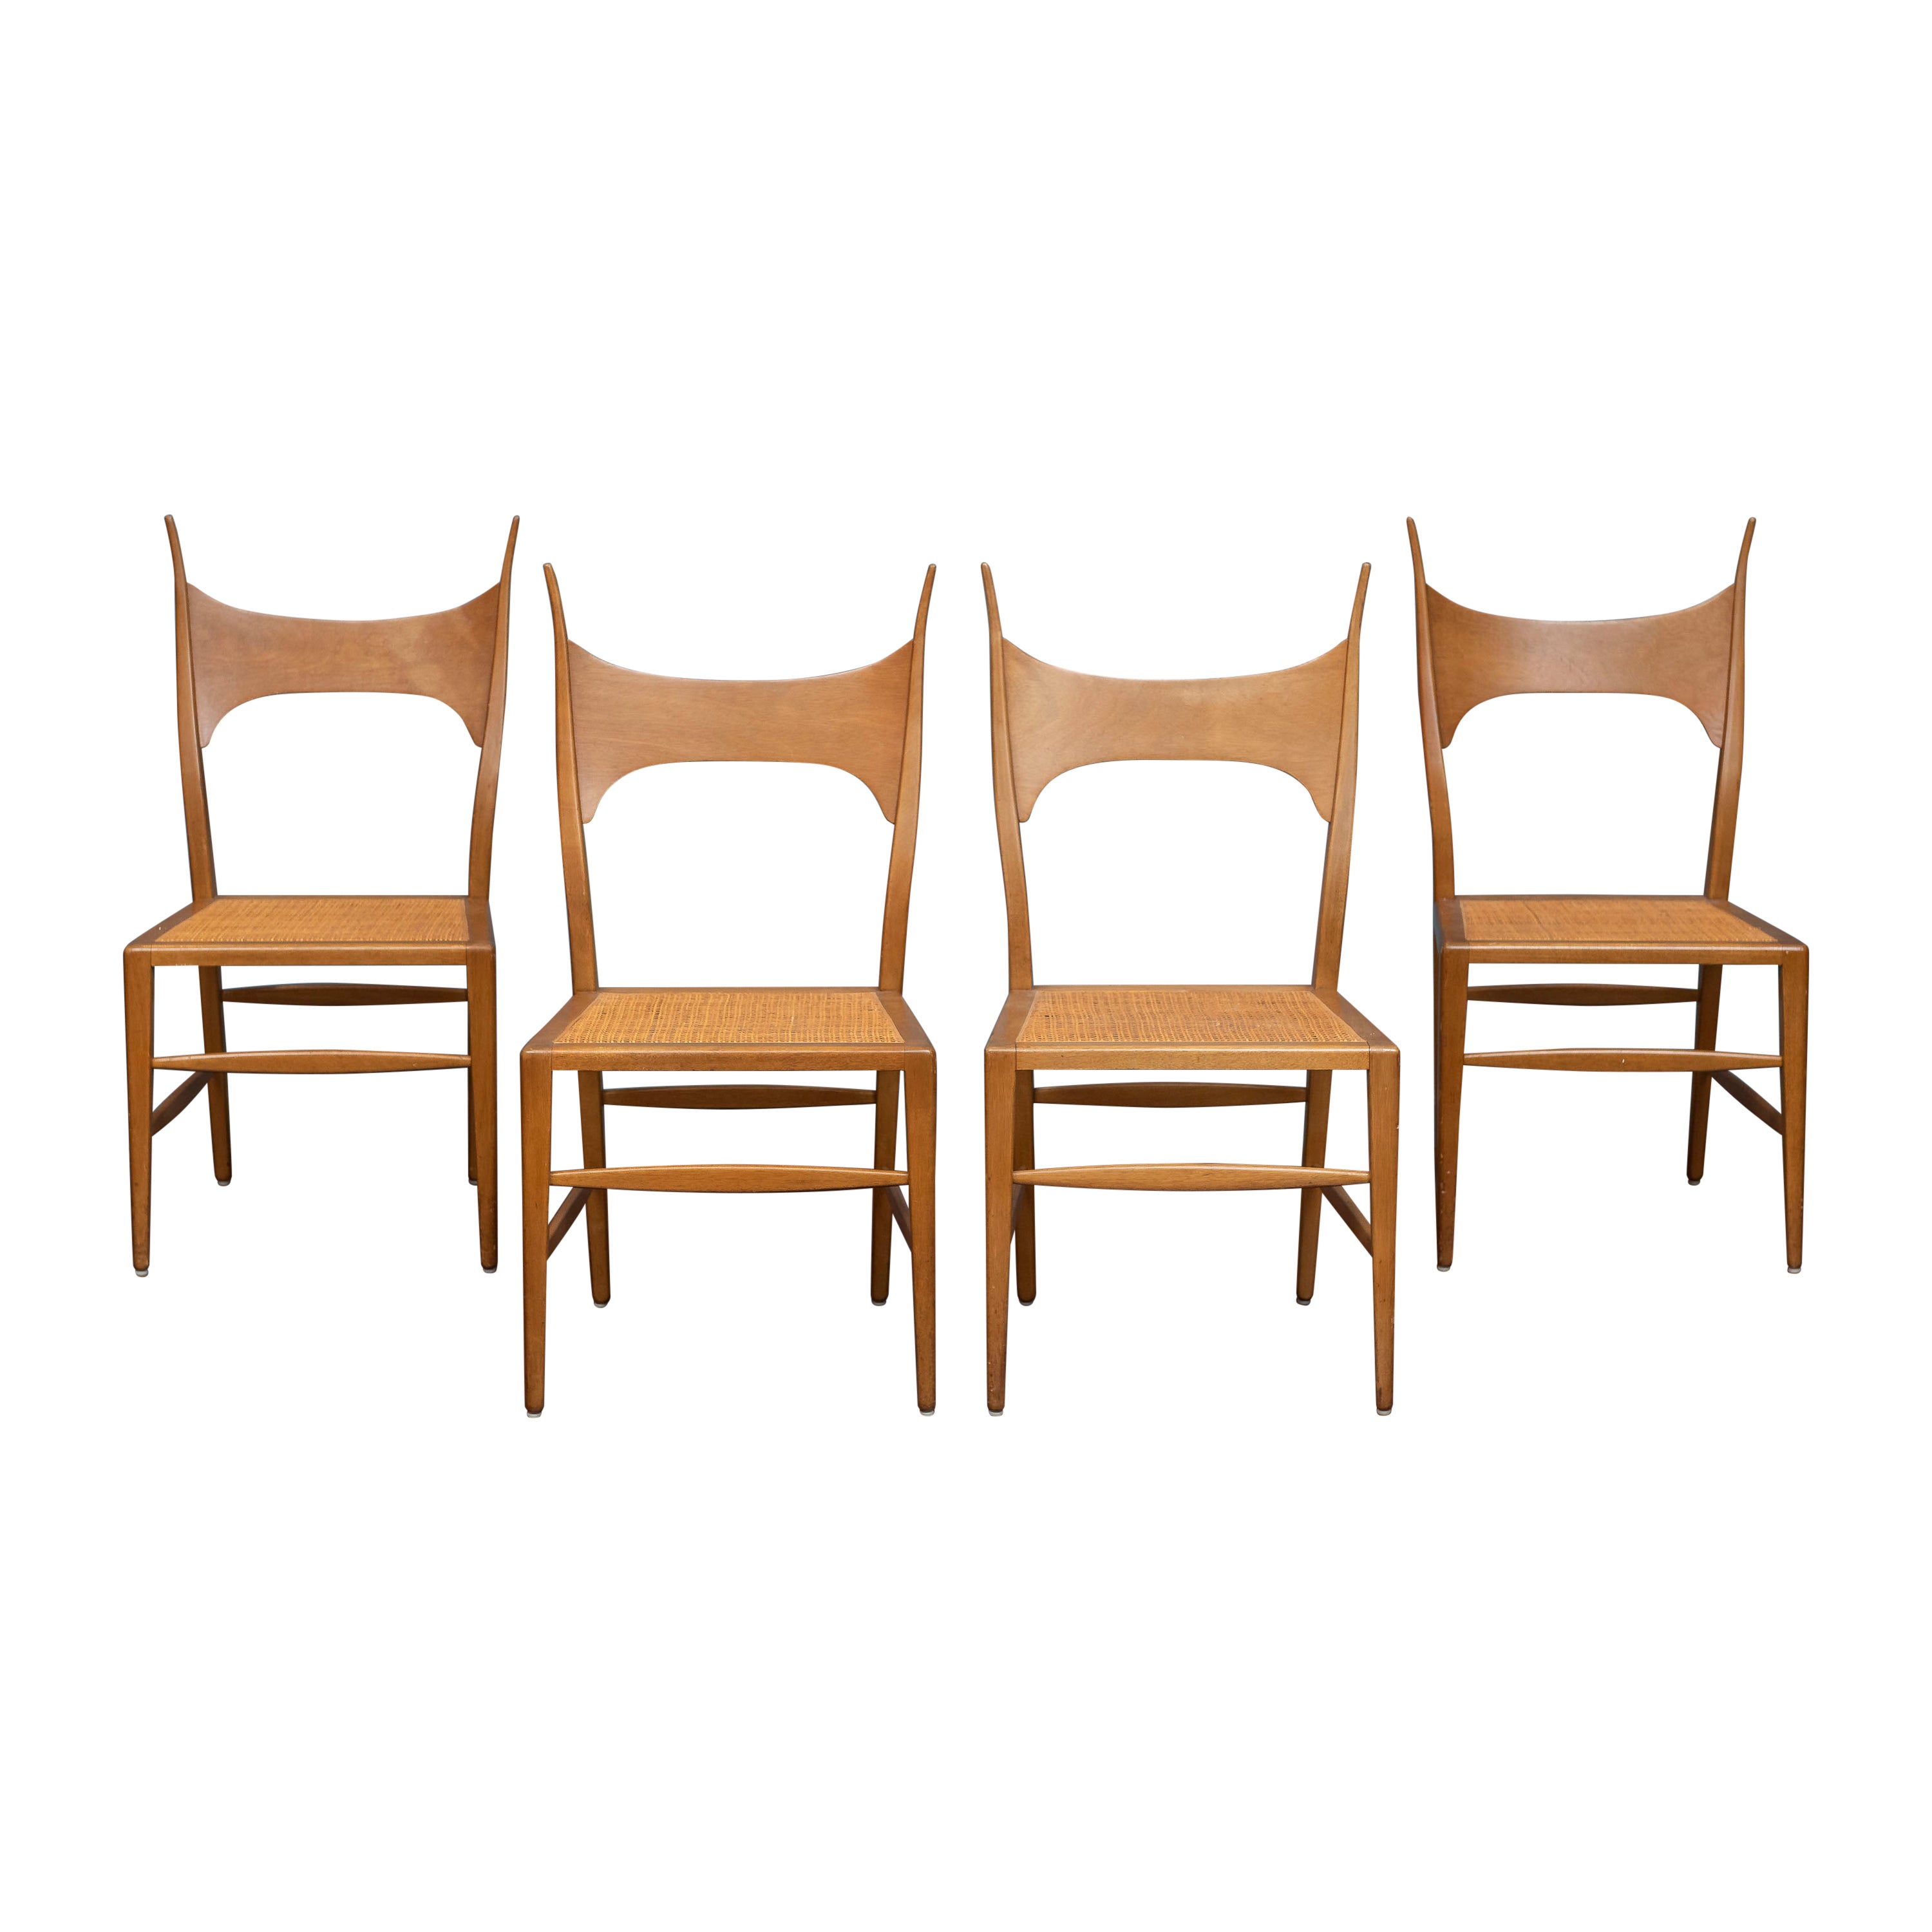 Edward Wormley Antler Chairs for Dunbar, Model 5580 For Sale